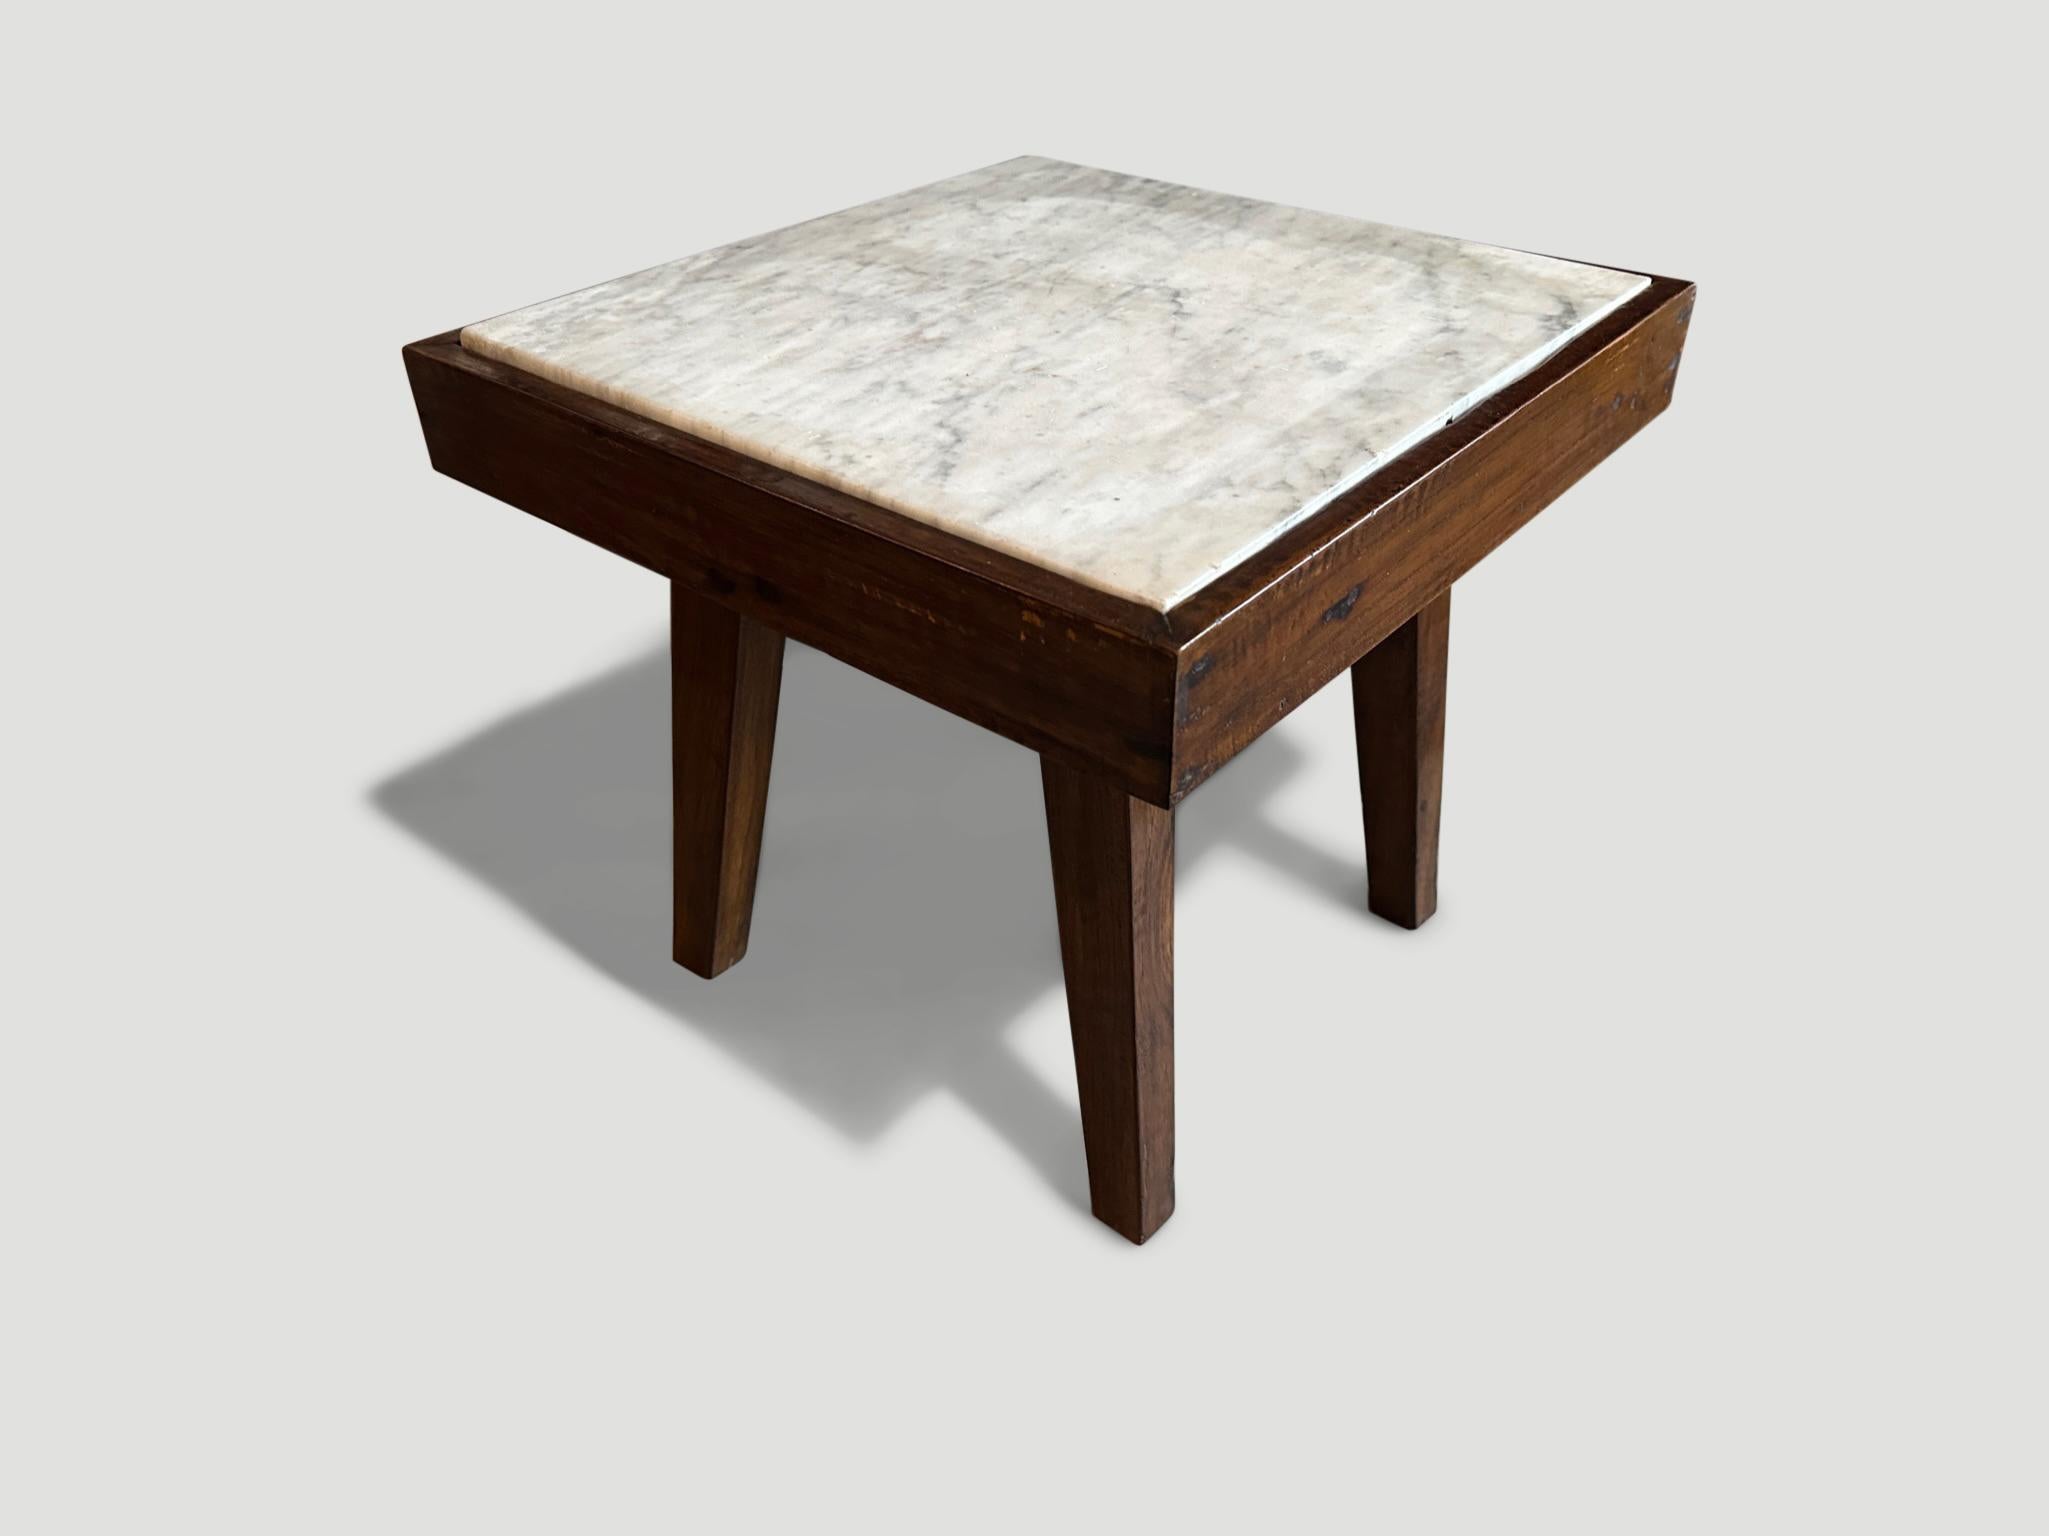 A single slab of marble rests inside a teak wood frame. Please note the sides of the marble have a little wear due to the age.

This side table was sourced in the spirit of Wabi-Sabi, a Japanese philosophy that beauty can be found in imperfection